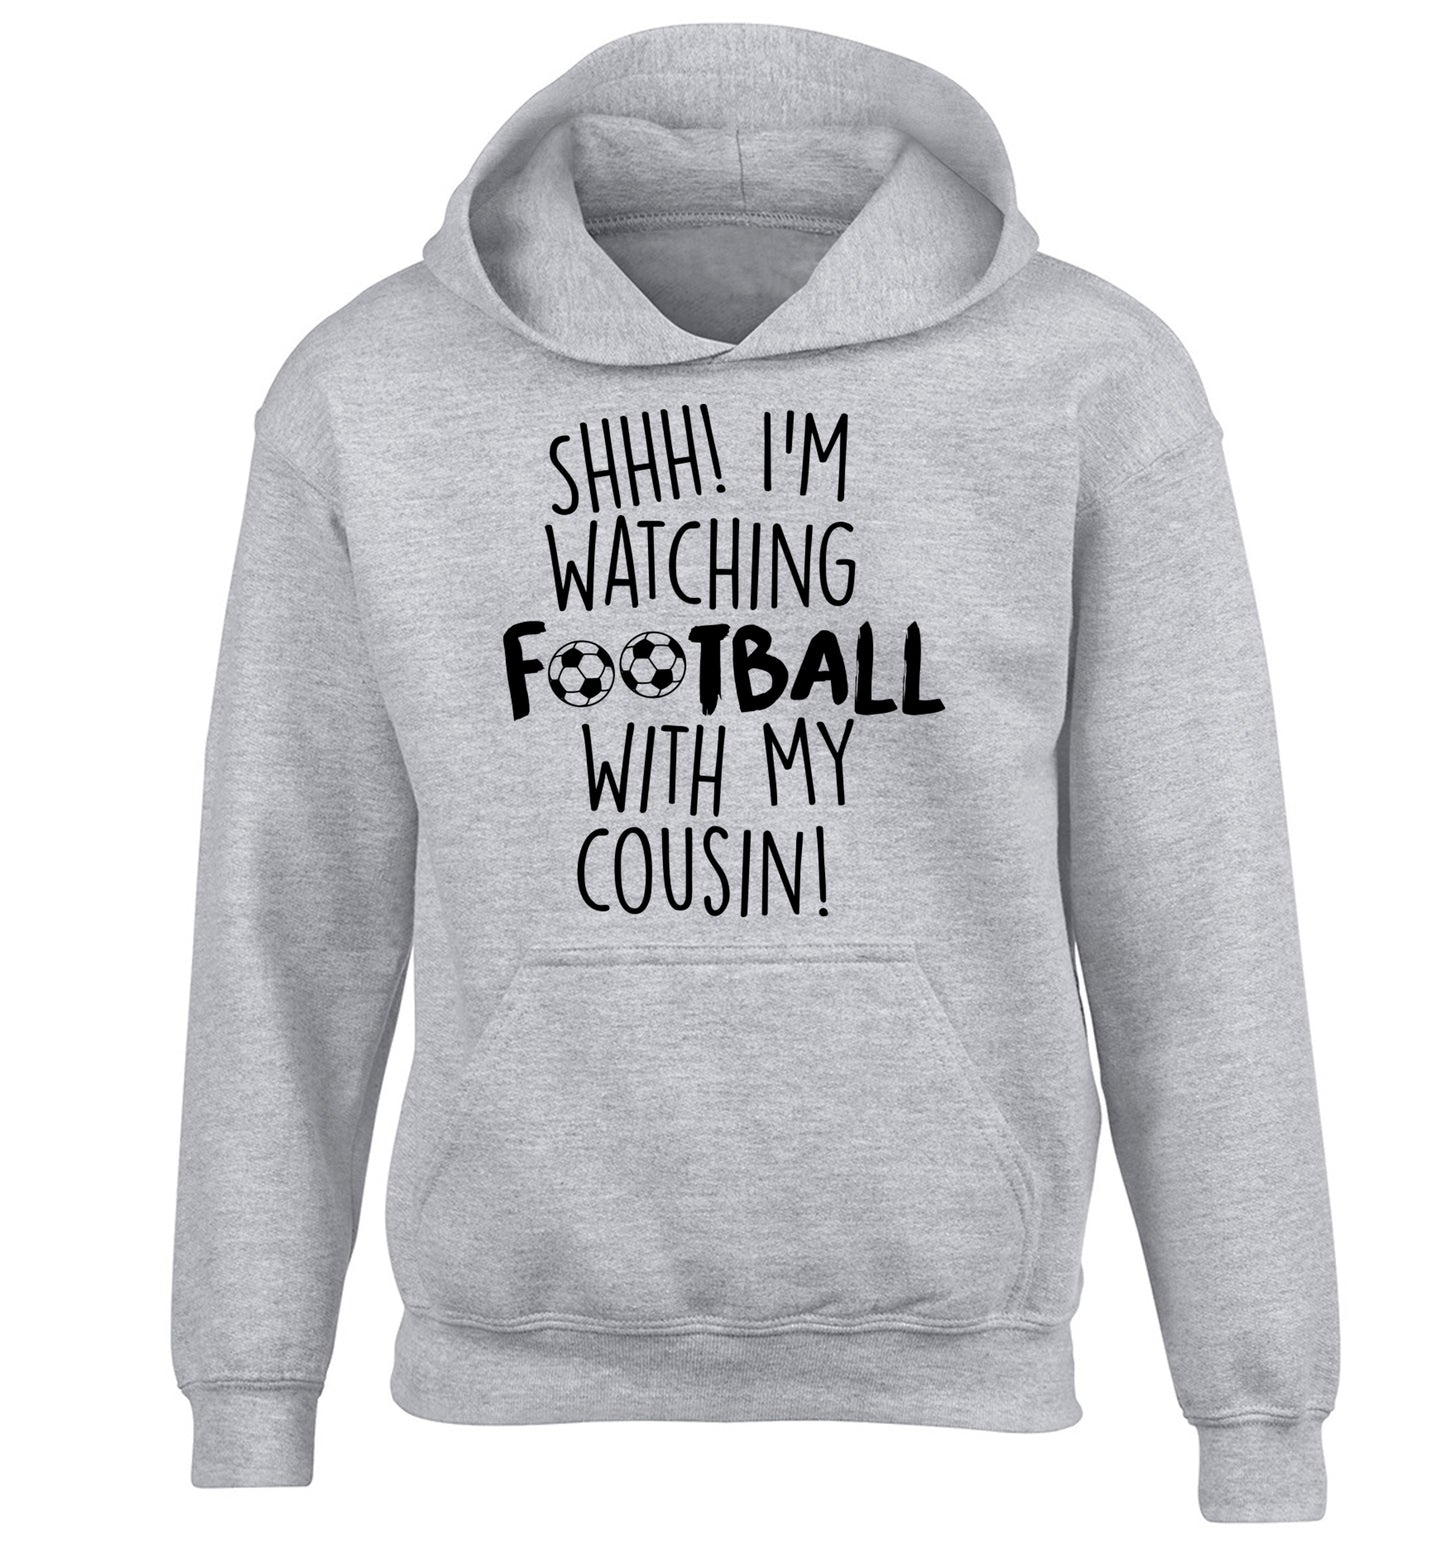 Shhh I'm watching football with my cousin children's grey hoodie 12-14 Years